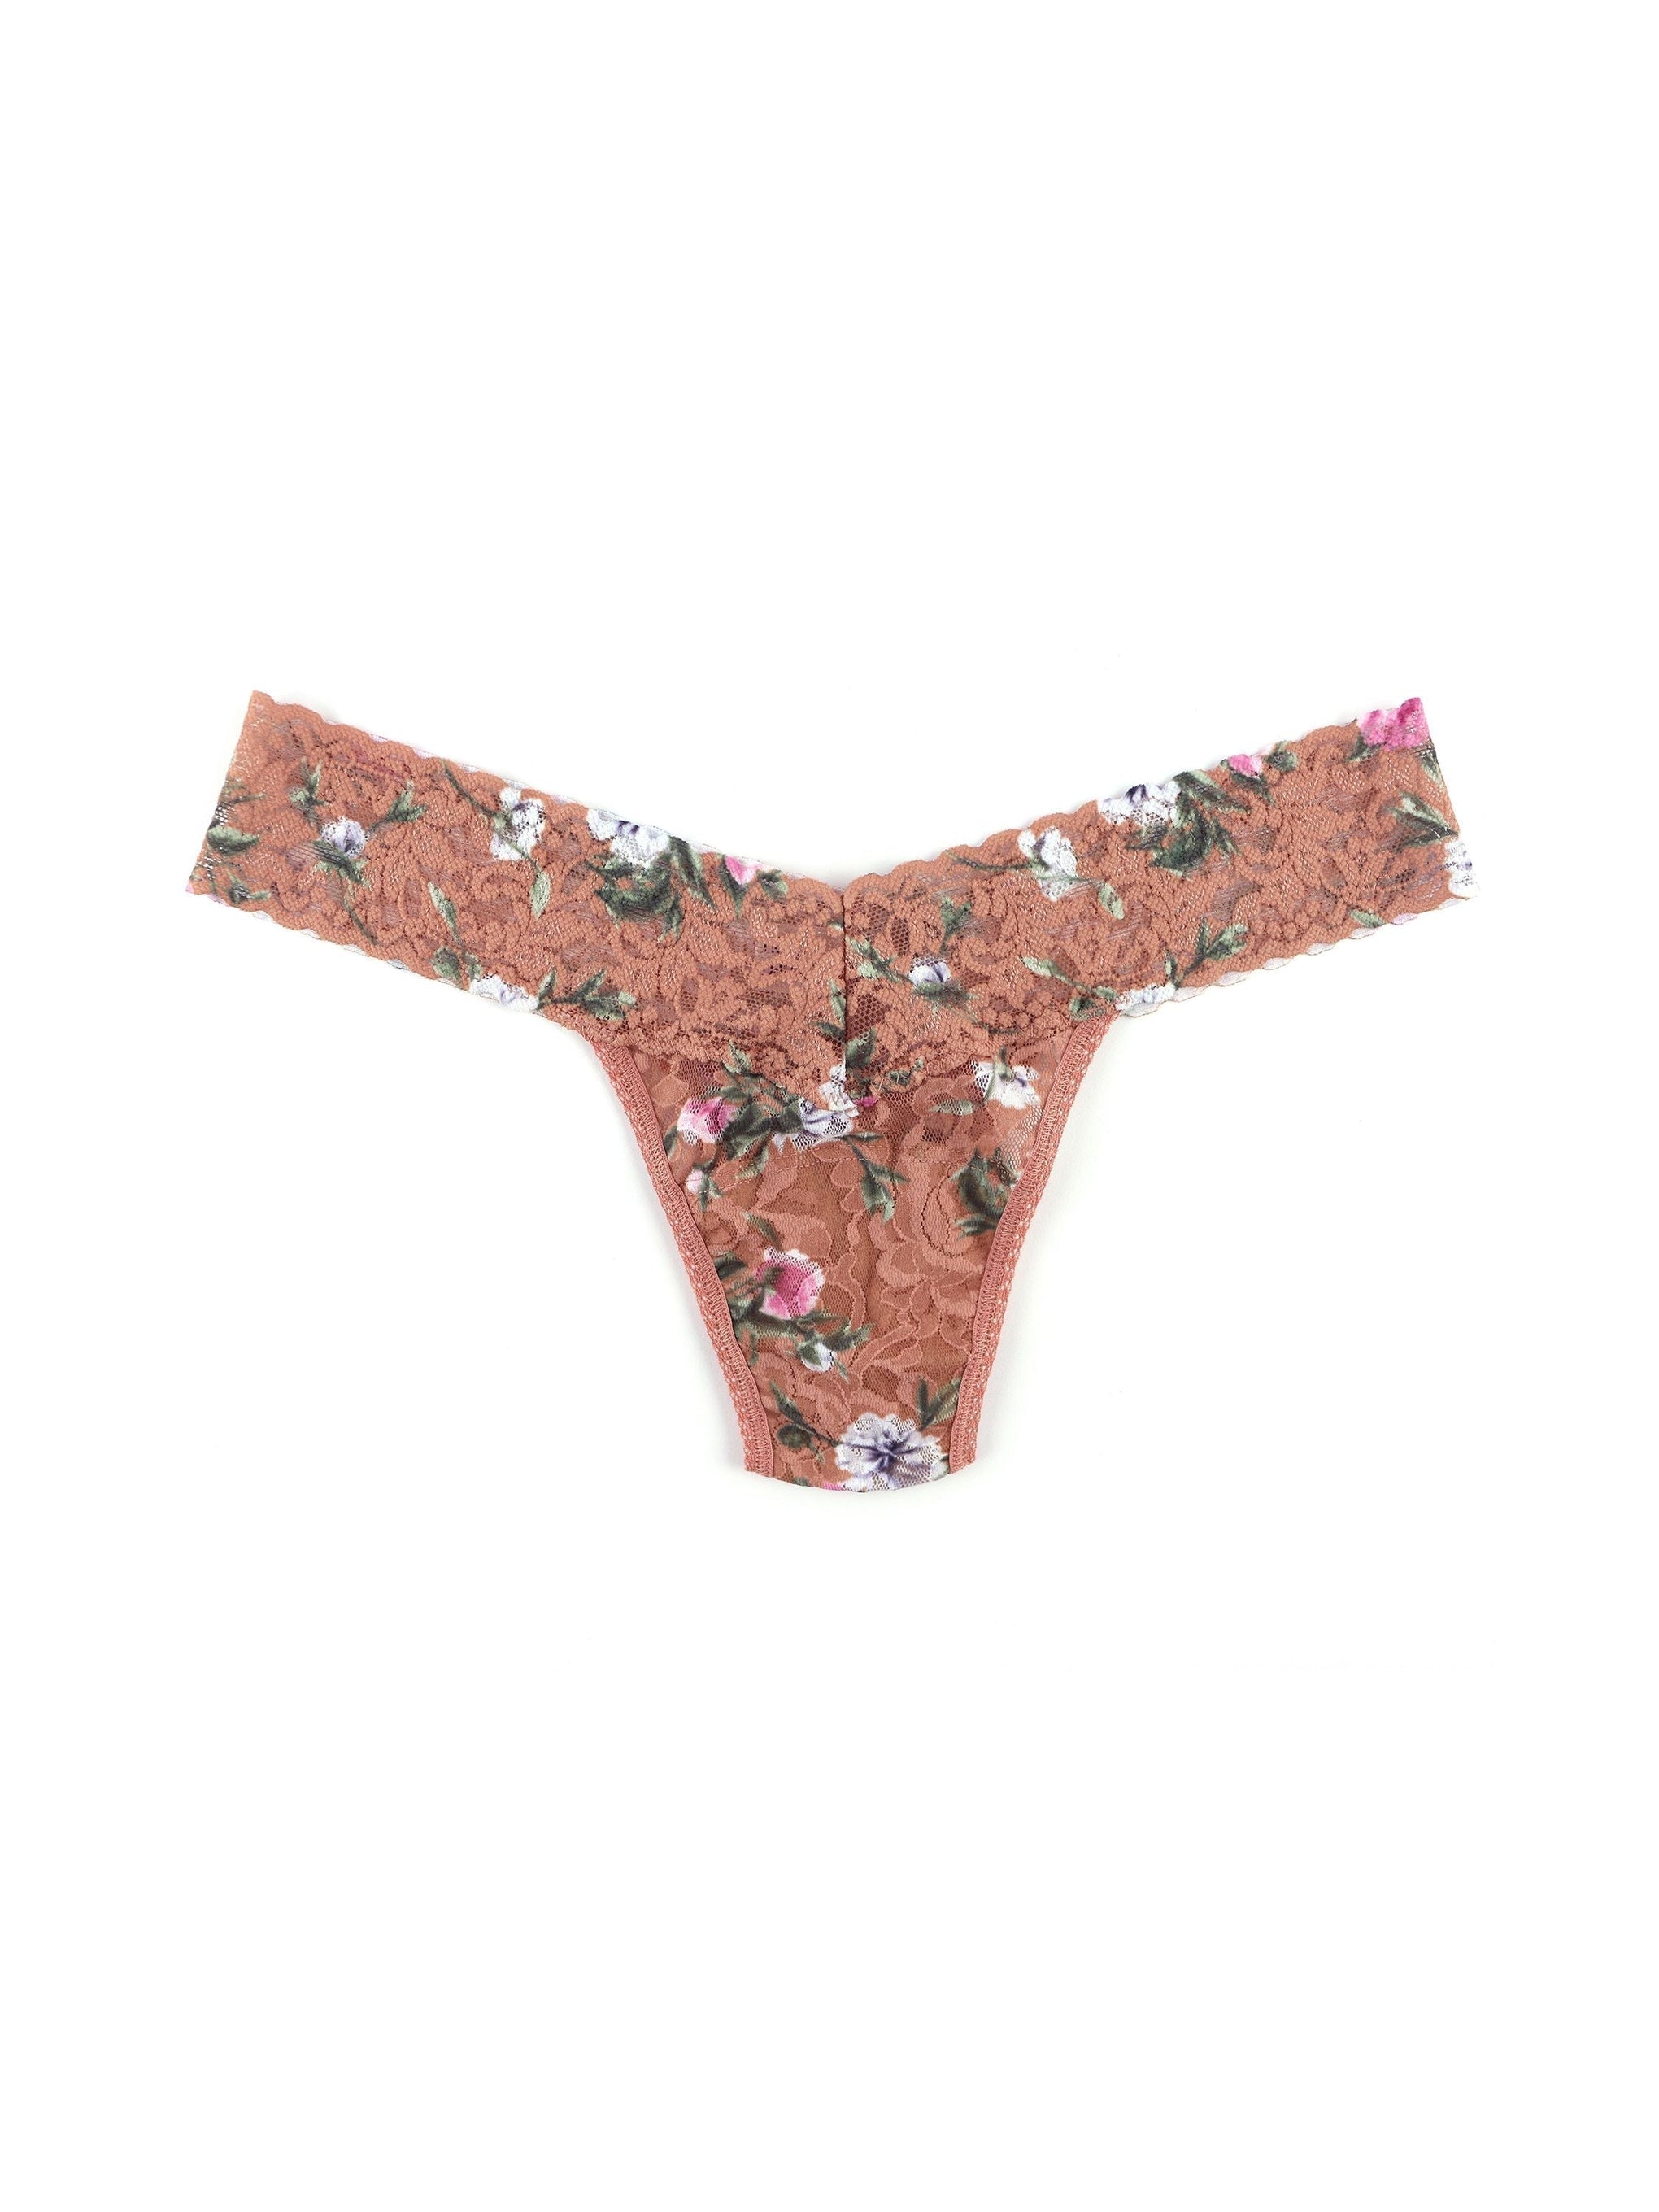 Printed Signature Lace Low Rise Thong Terracotta Rose Sale